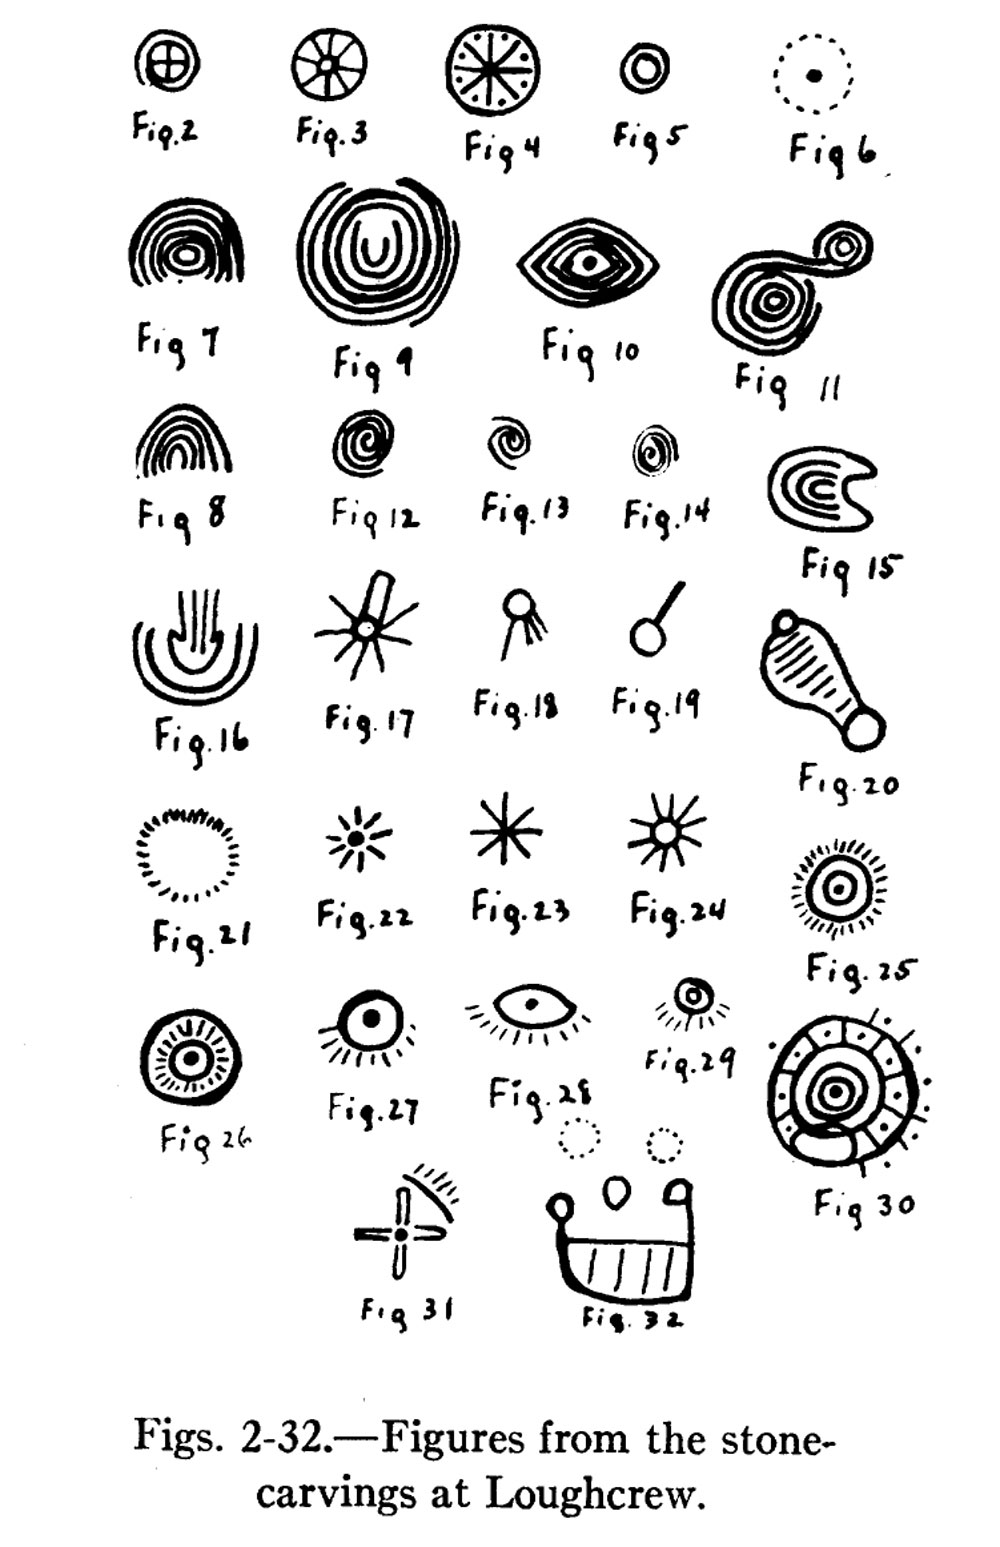 A table of the chief symbols encountered in the engraved art at Loughcrew, taken from the report produced by American anthropoligist George Flom in 1924.